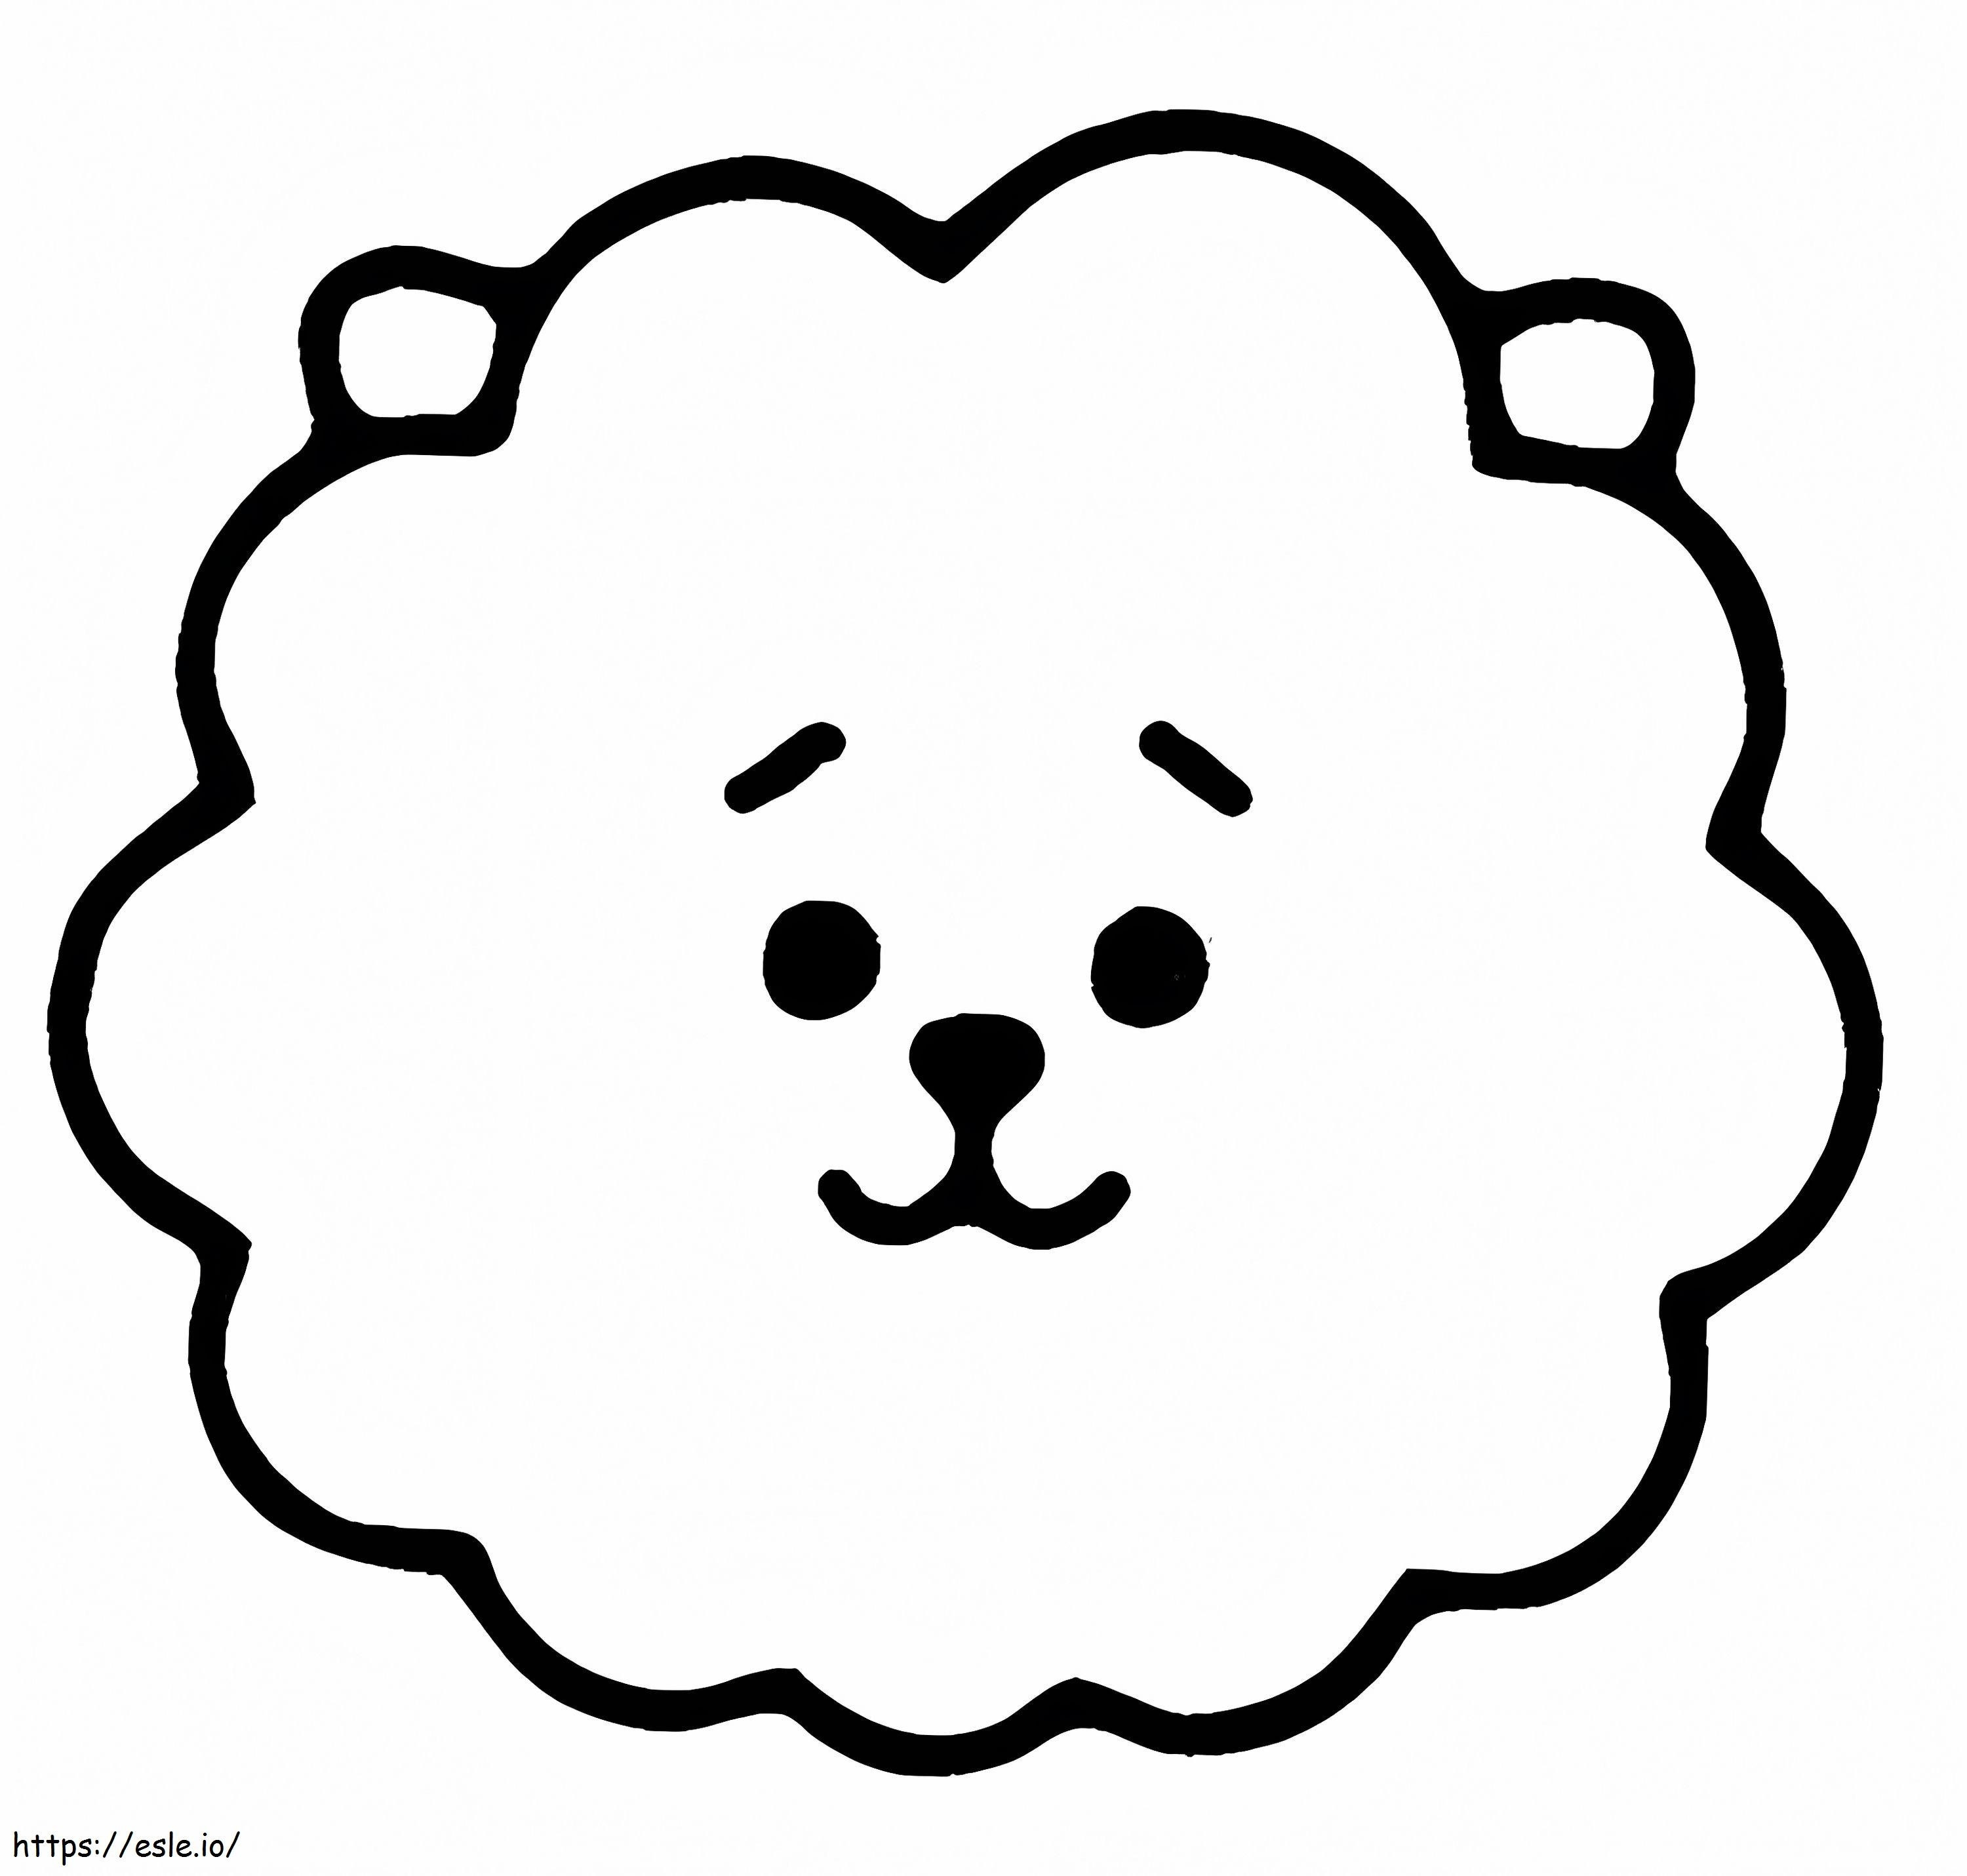 RJ From BT21 coloring page